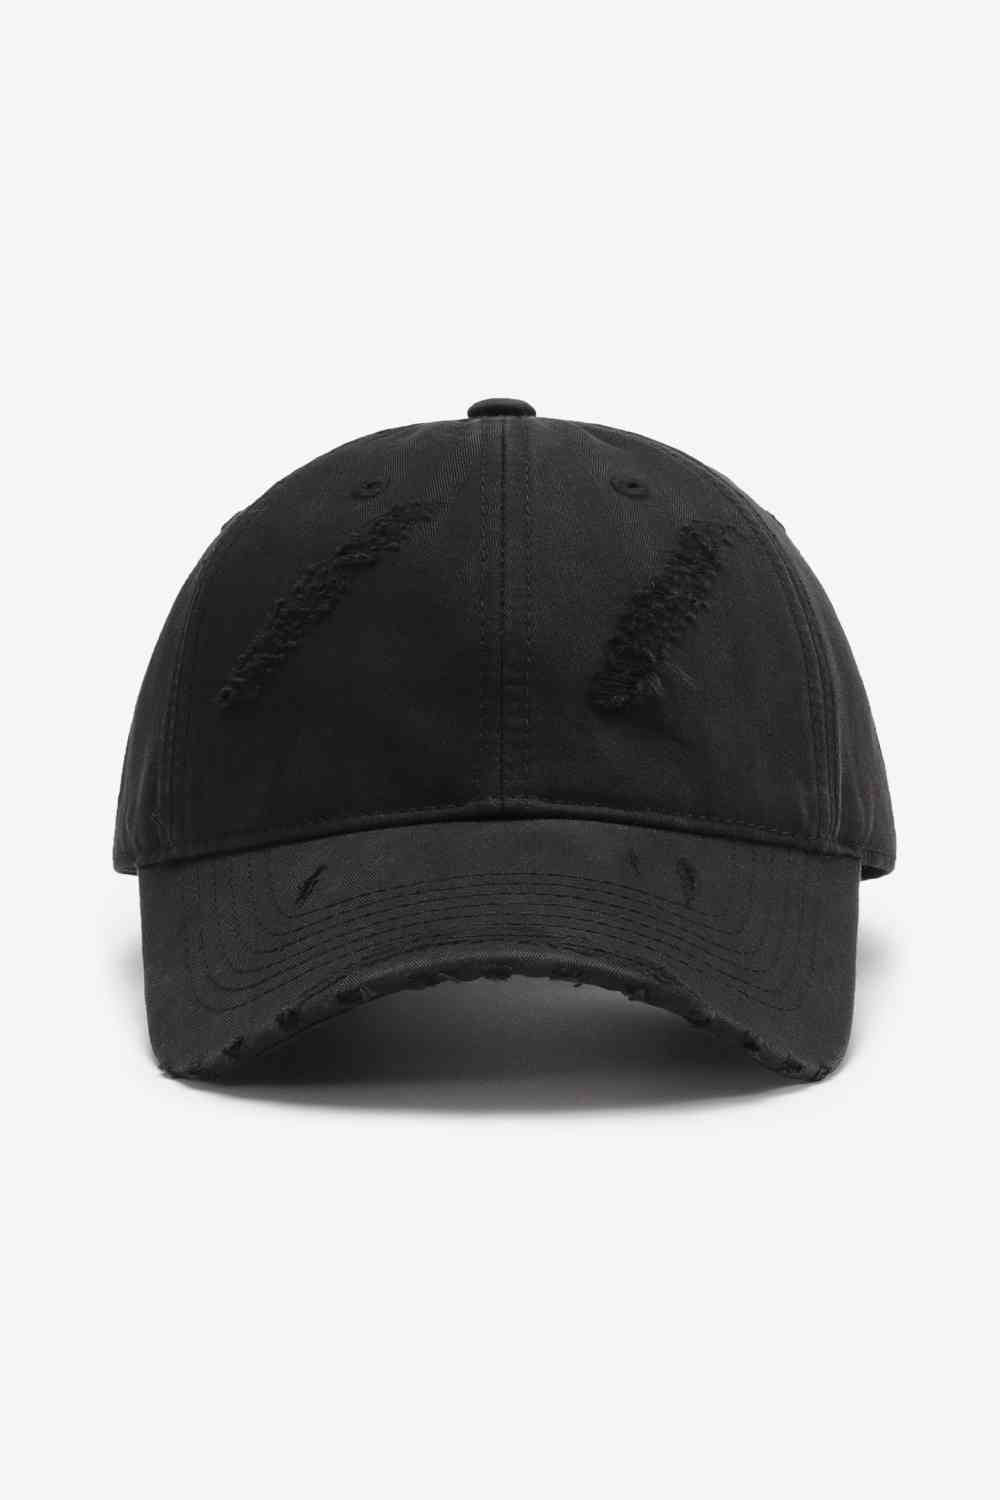 In Sync We Are Not Distressed Baseball Cap